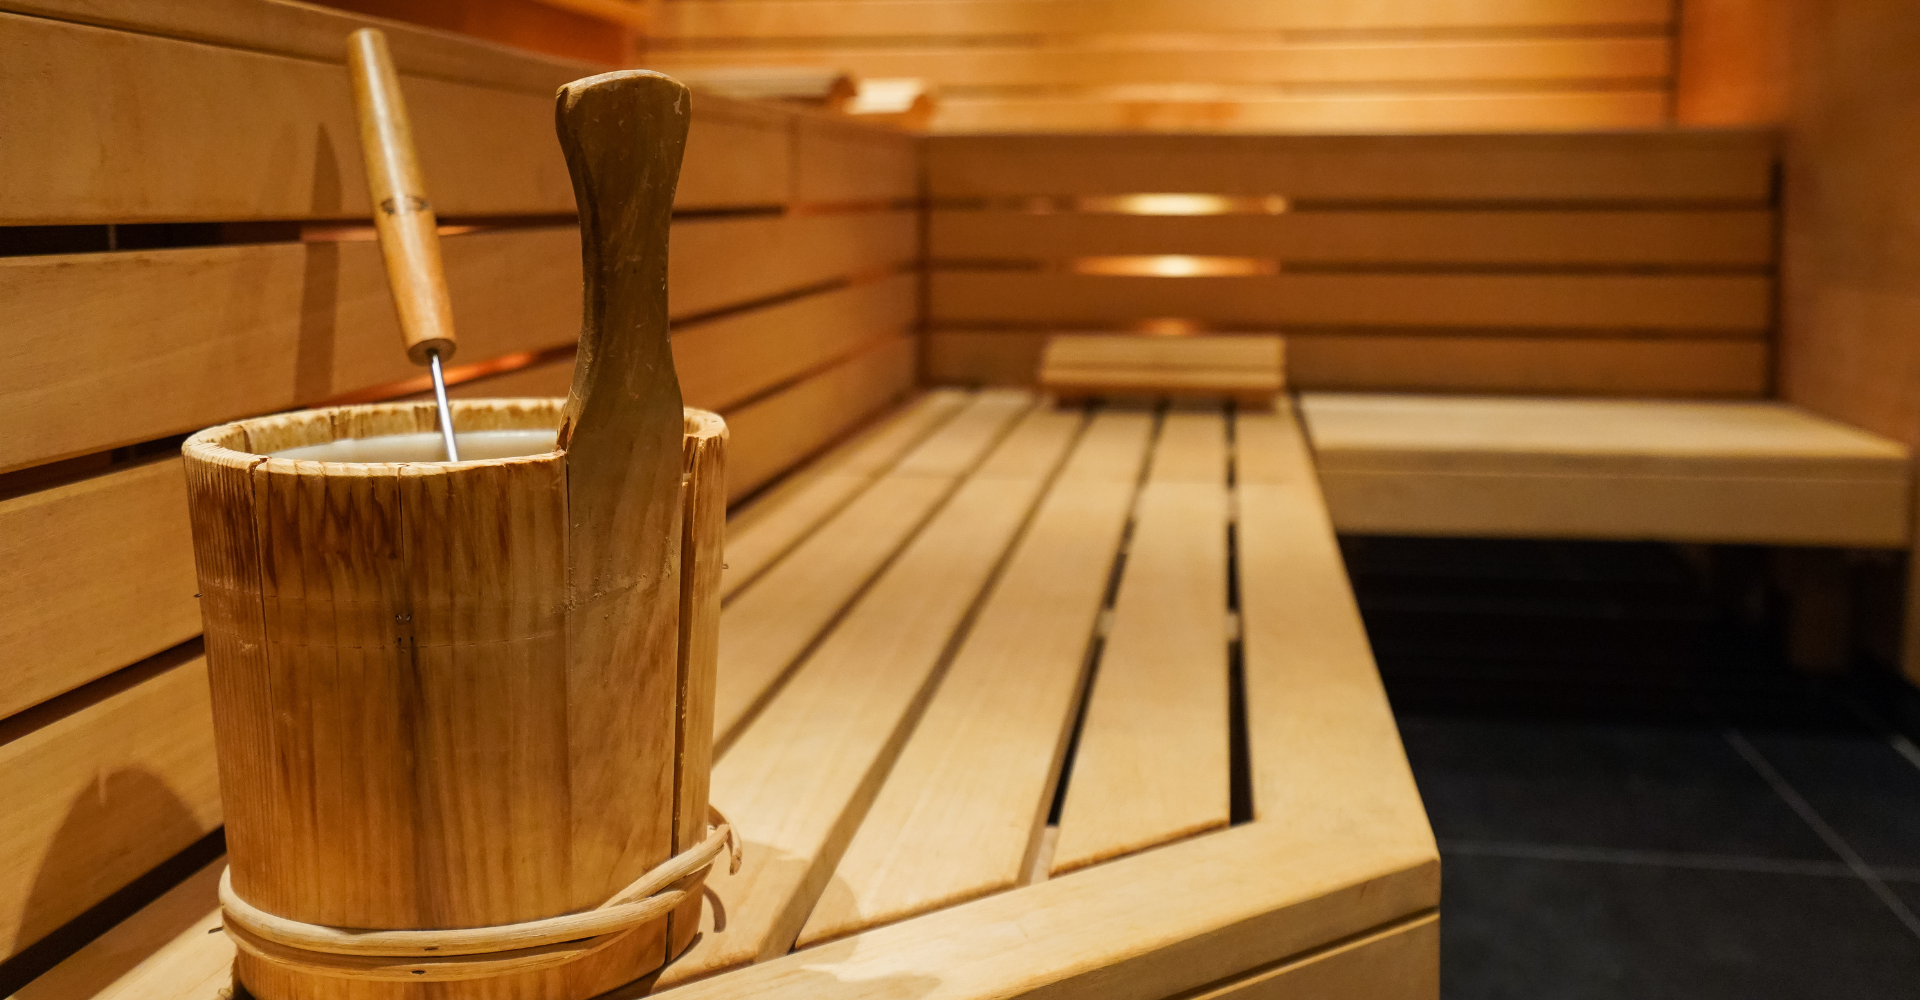 Does Sauna Help With Bloating, IBS and Digestion? Answered.